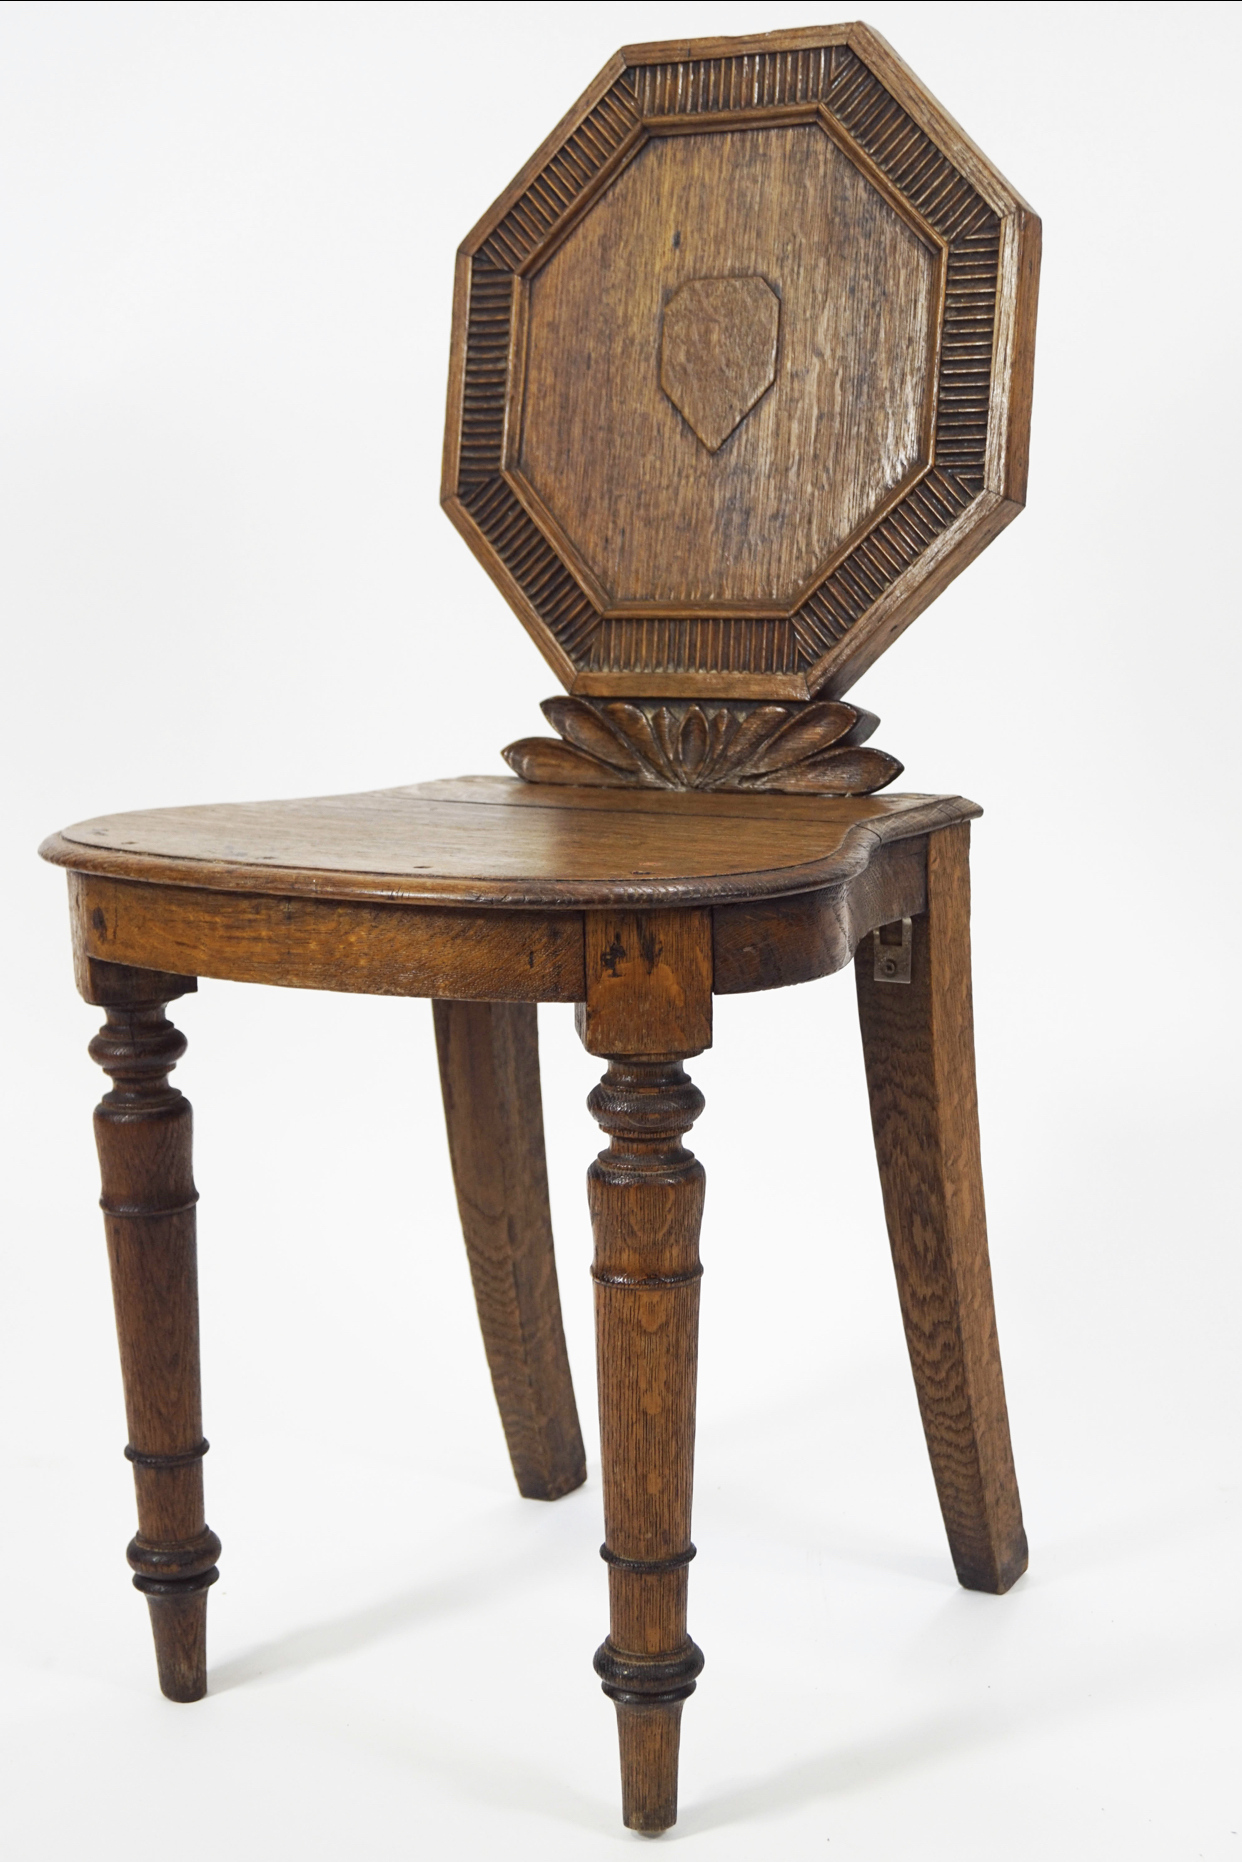 A 19th century oak hall chair, with octagonal back, solid seat and turned legs - Image 2 of 3